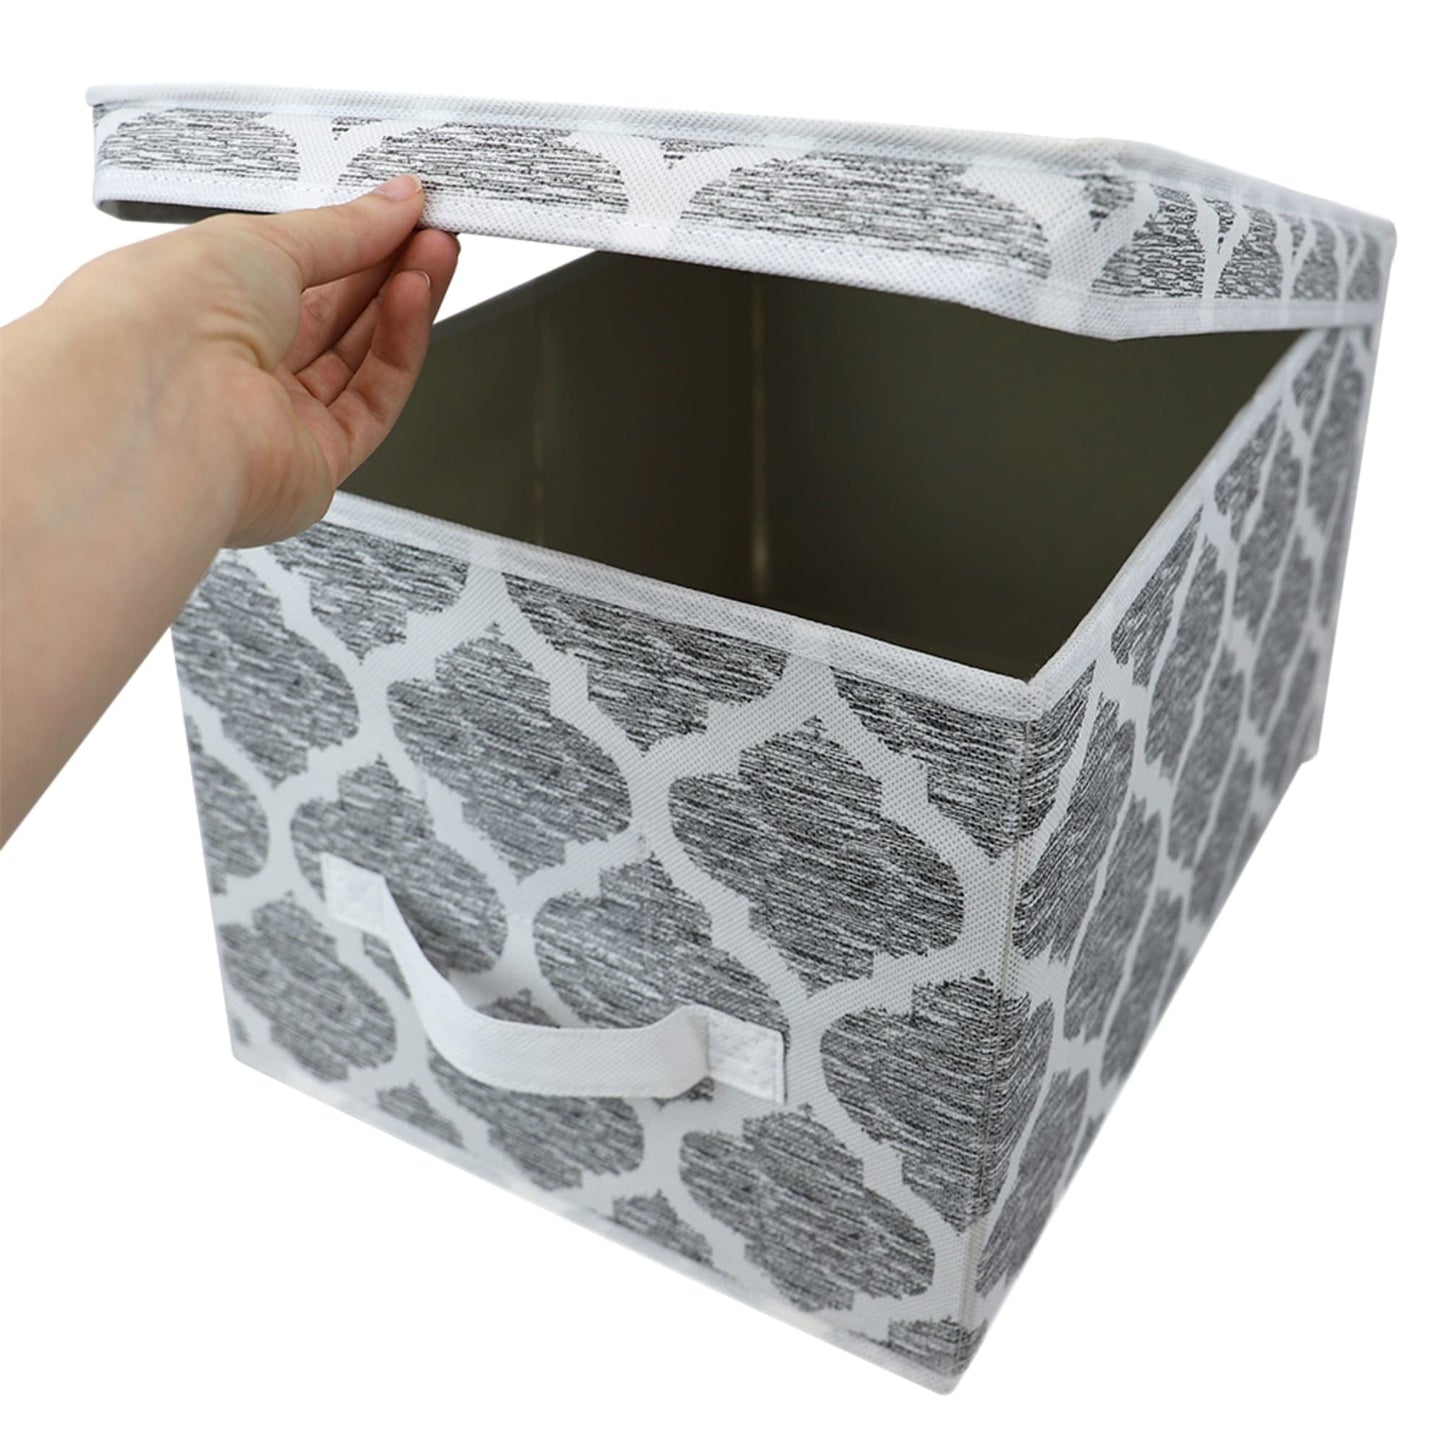 Arabesque Large Non-Woven  Storage Box with Label Window, Grey